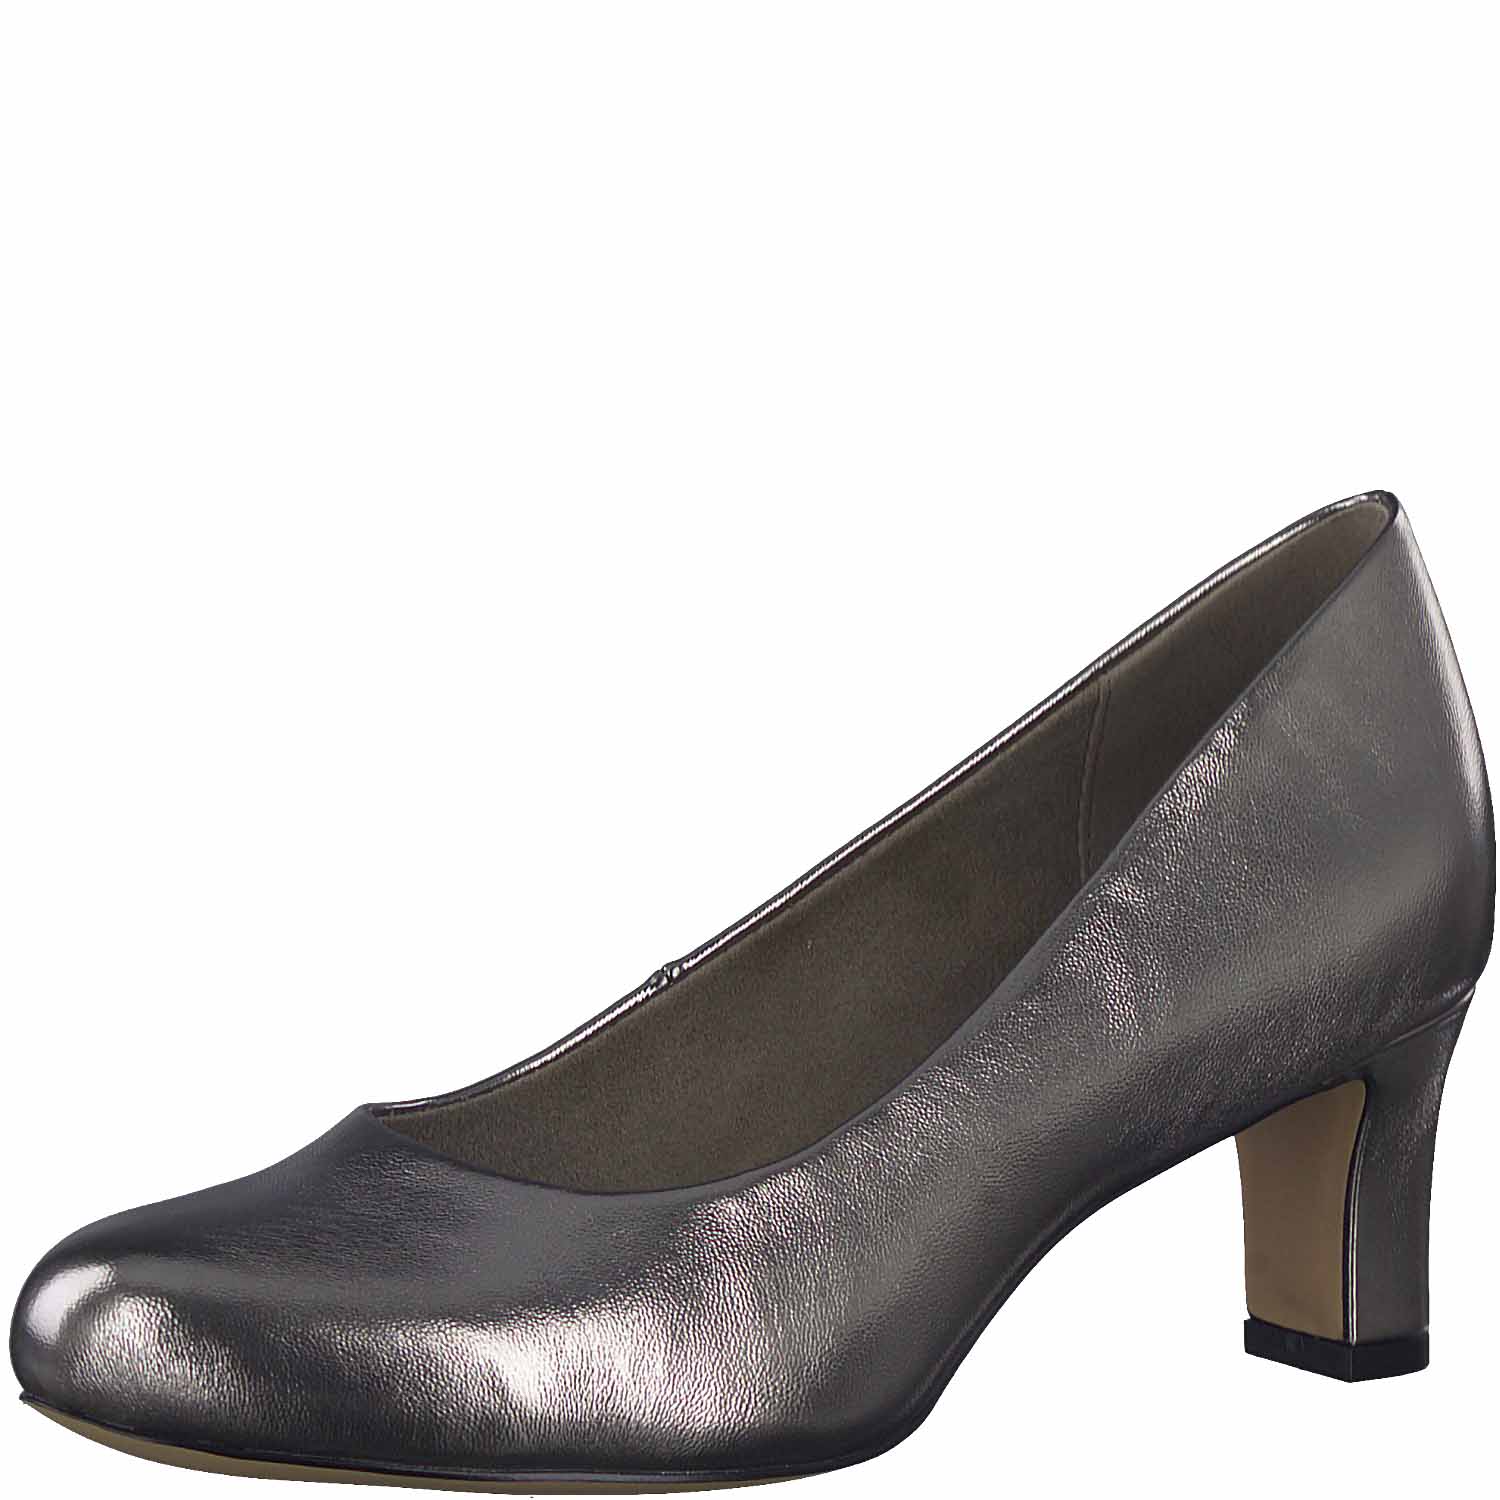 Angled view of the Pewter Low Heel highlighting its unique design.